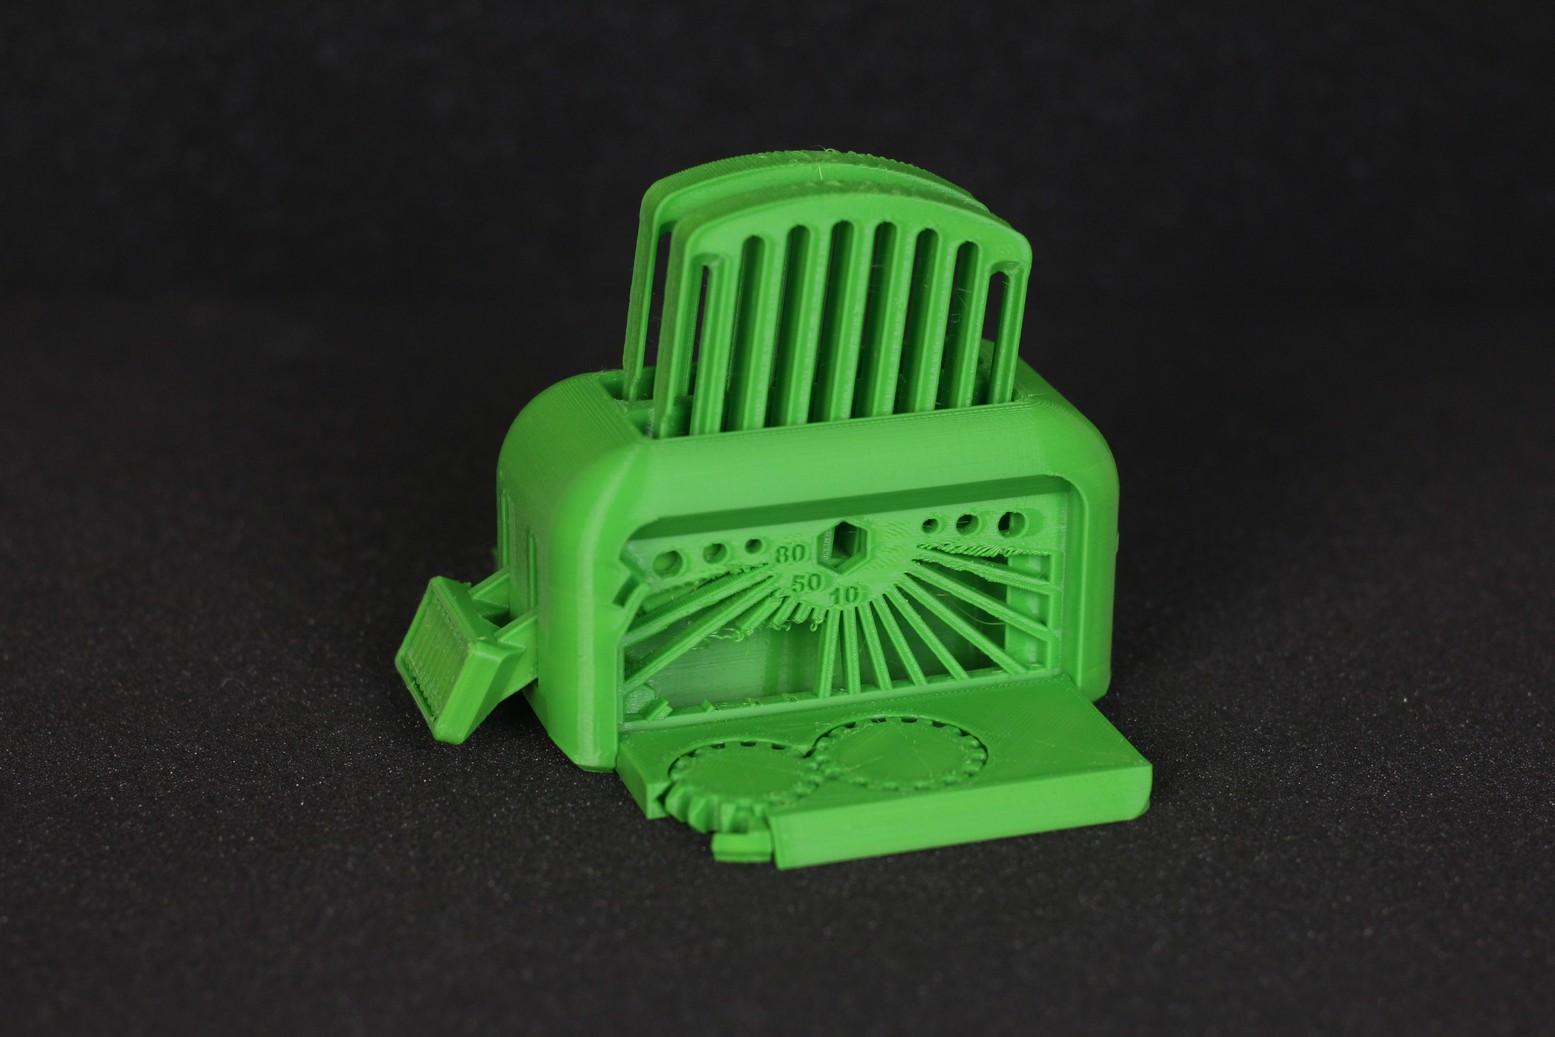 Torture Toaster PETG on CR 200B 3 | Creality CR-200B Review: Budget Enclosed 3D Printer